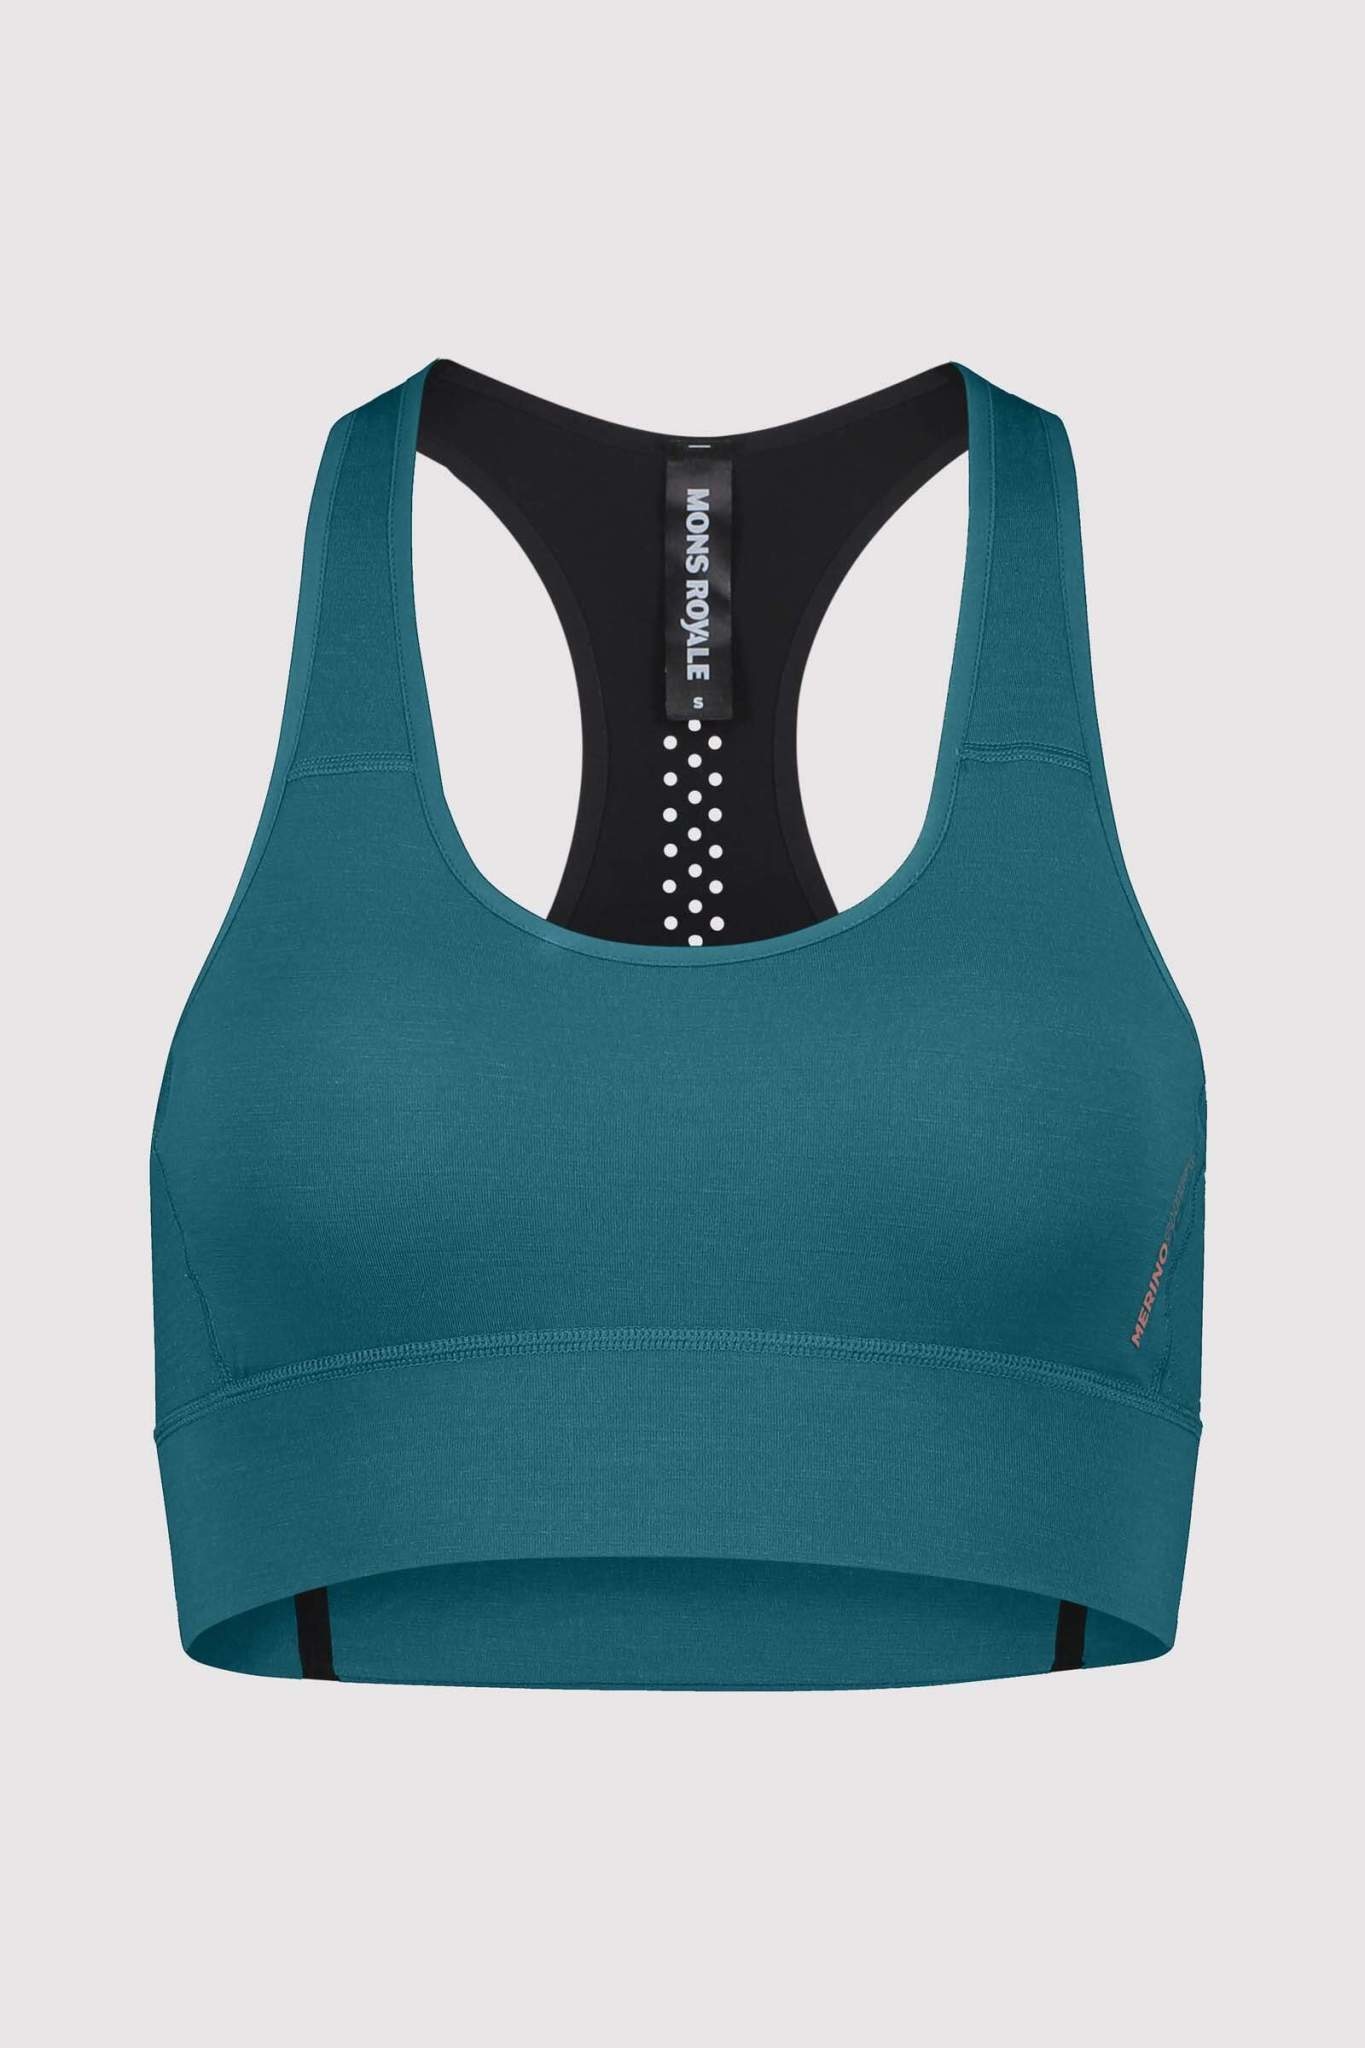 Mons Royale Women's Stratos Bra  The BackCountry in Truckee, CA